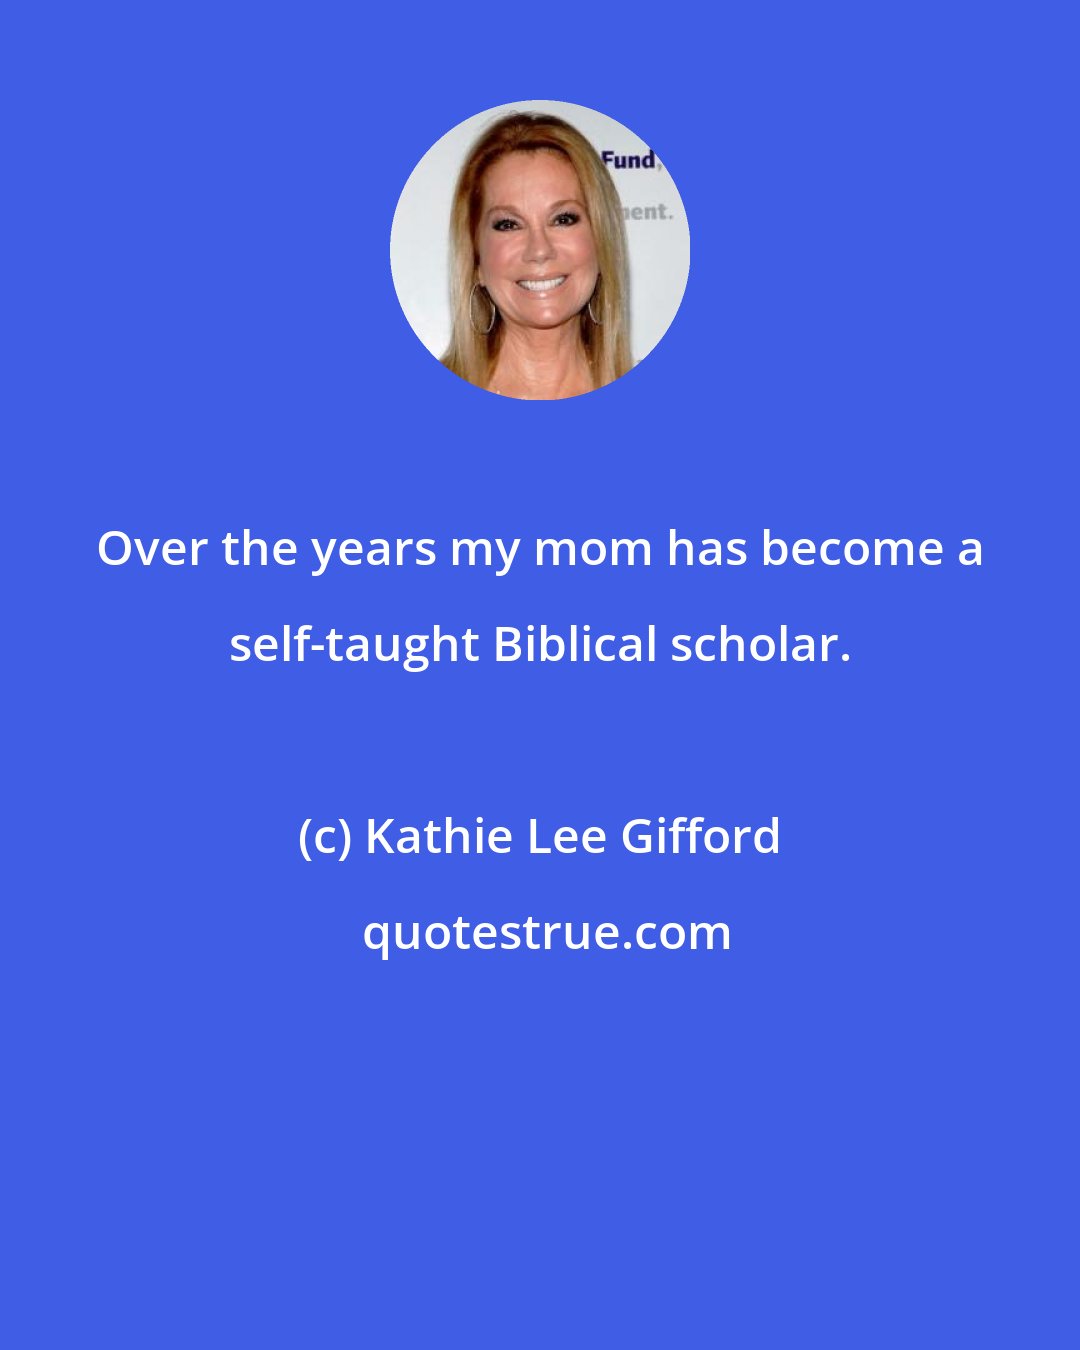 Kathie Lee Gifford: Over the years my mom has become a self-taught Biblical scholar.